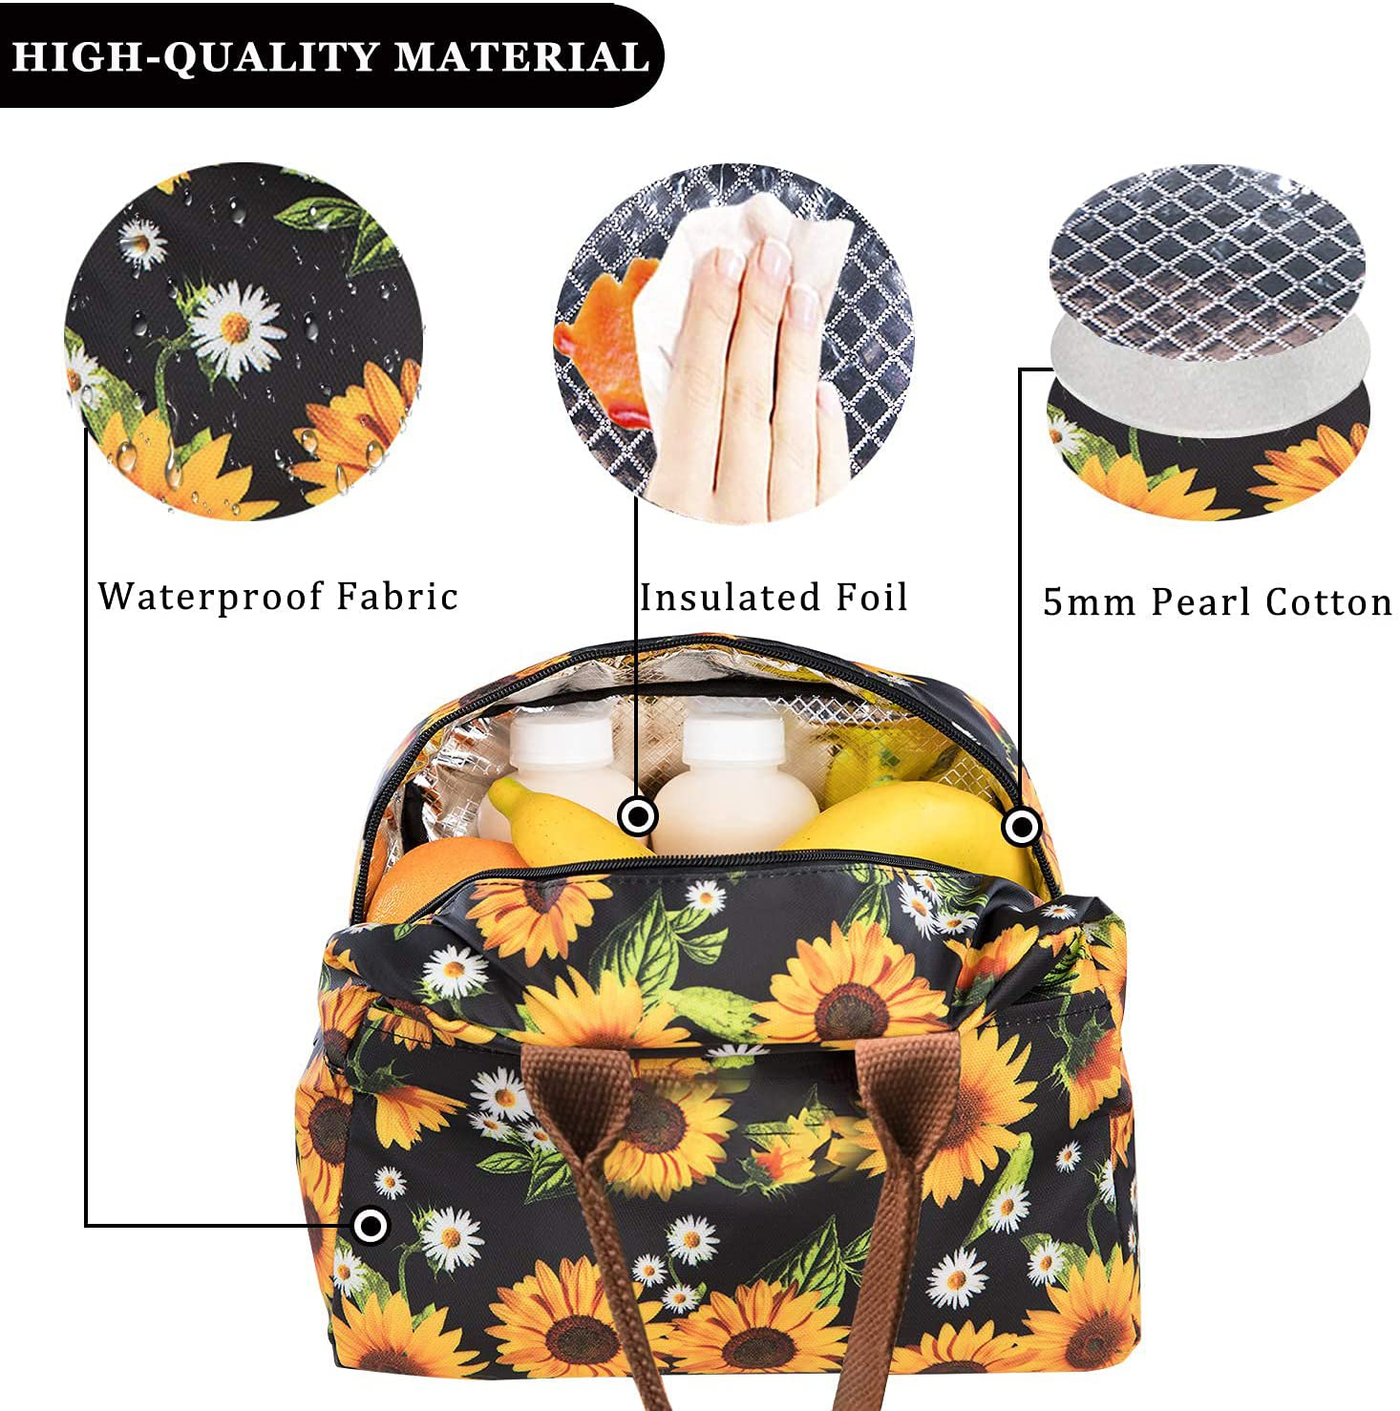 Lunch Bags for Women Insulated Lunch Box Cooler Tote Bag with Front Pocket Reusable Lunch Bag for Men Adults Girls Work Hiking Picnic - Sunflower